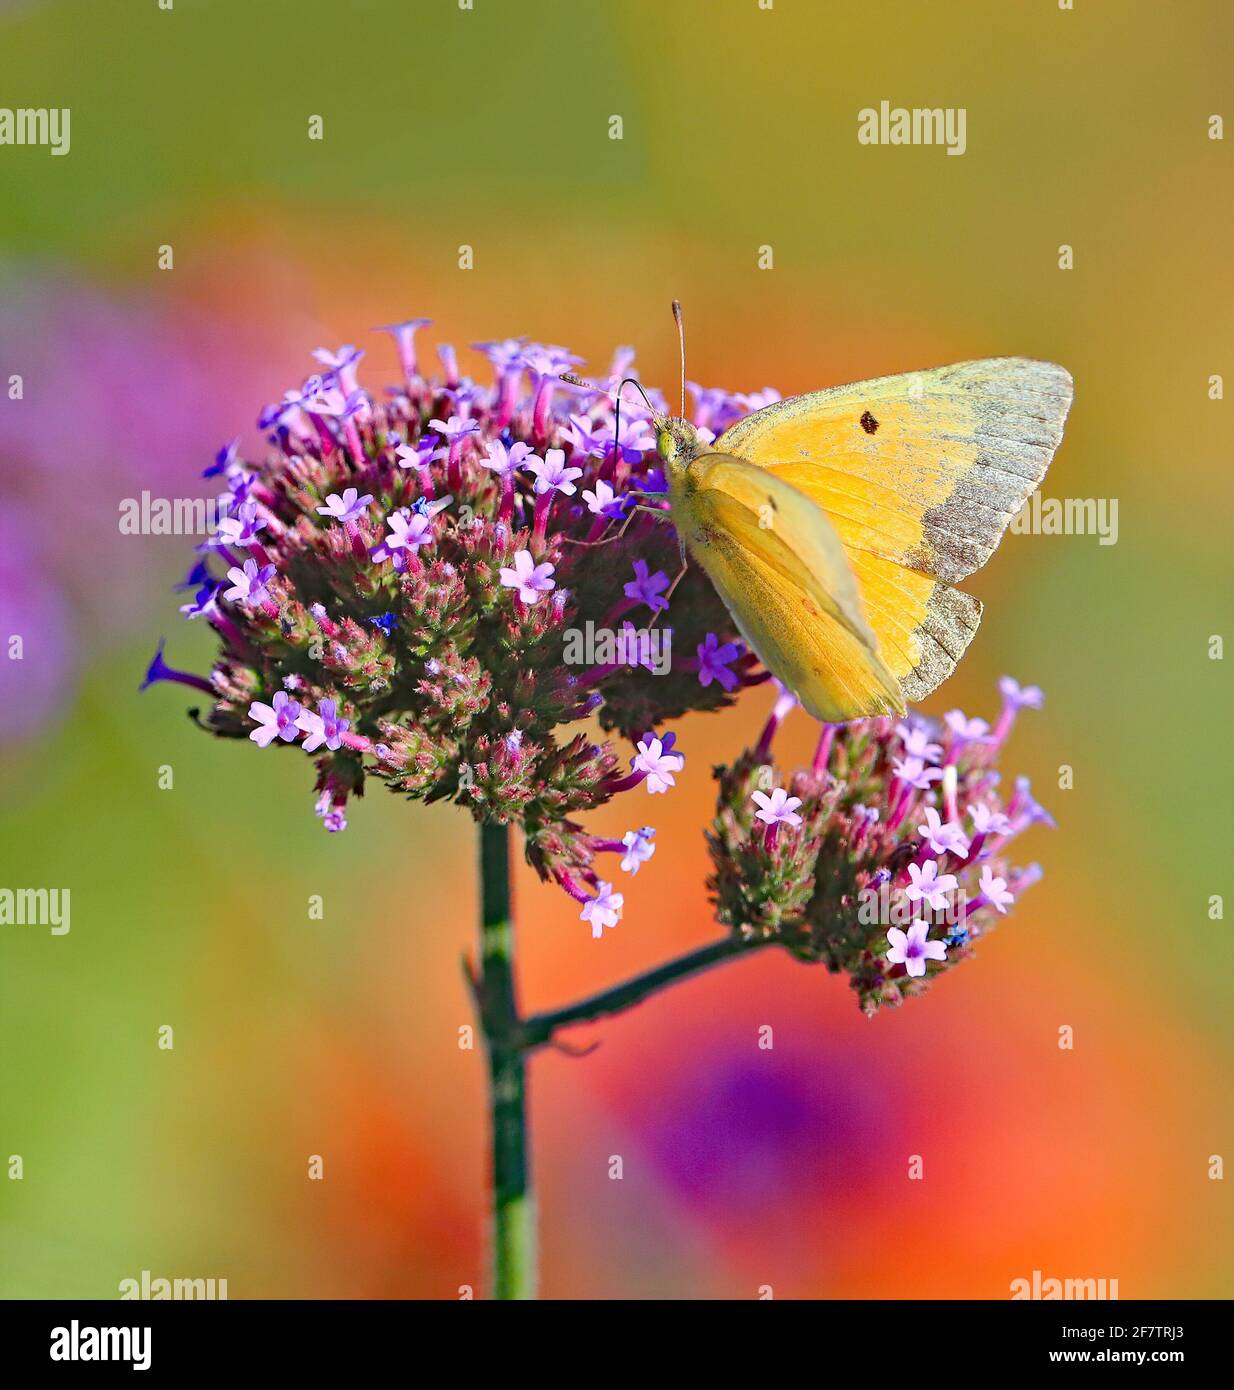 A Yellow Butterfly, called an Orange Sulphur, collecting nectar atop a flowering Verbena plant, with a soft, multi colored garden background. Stock Photo